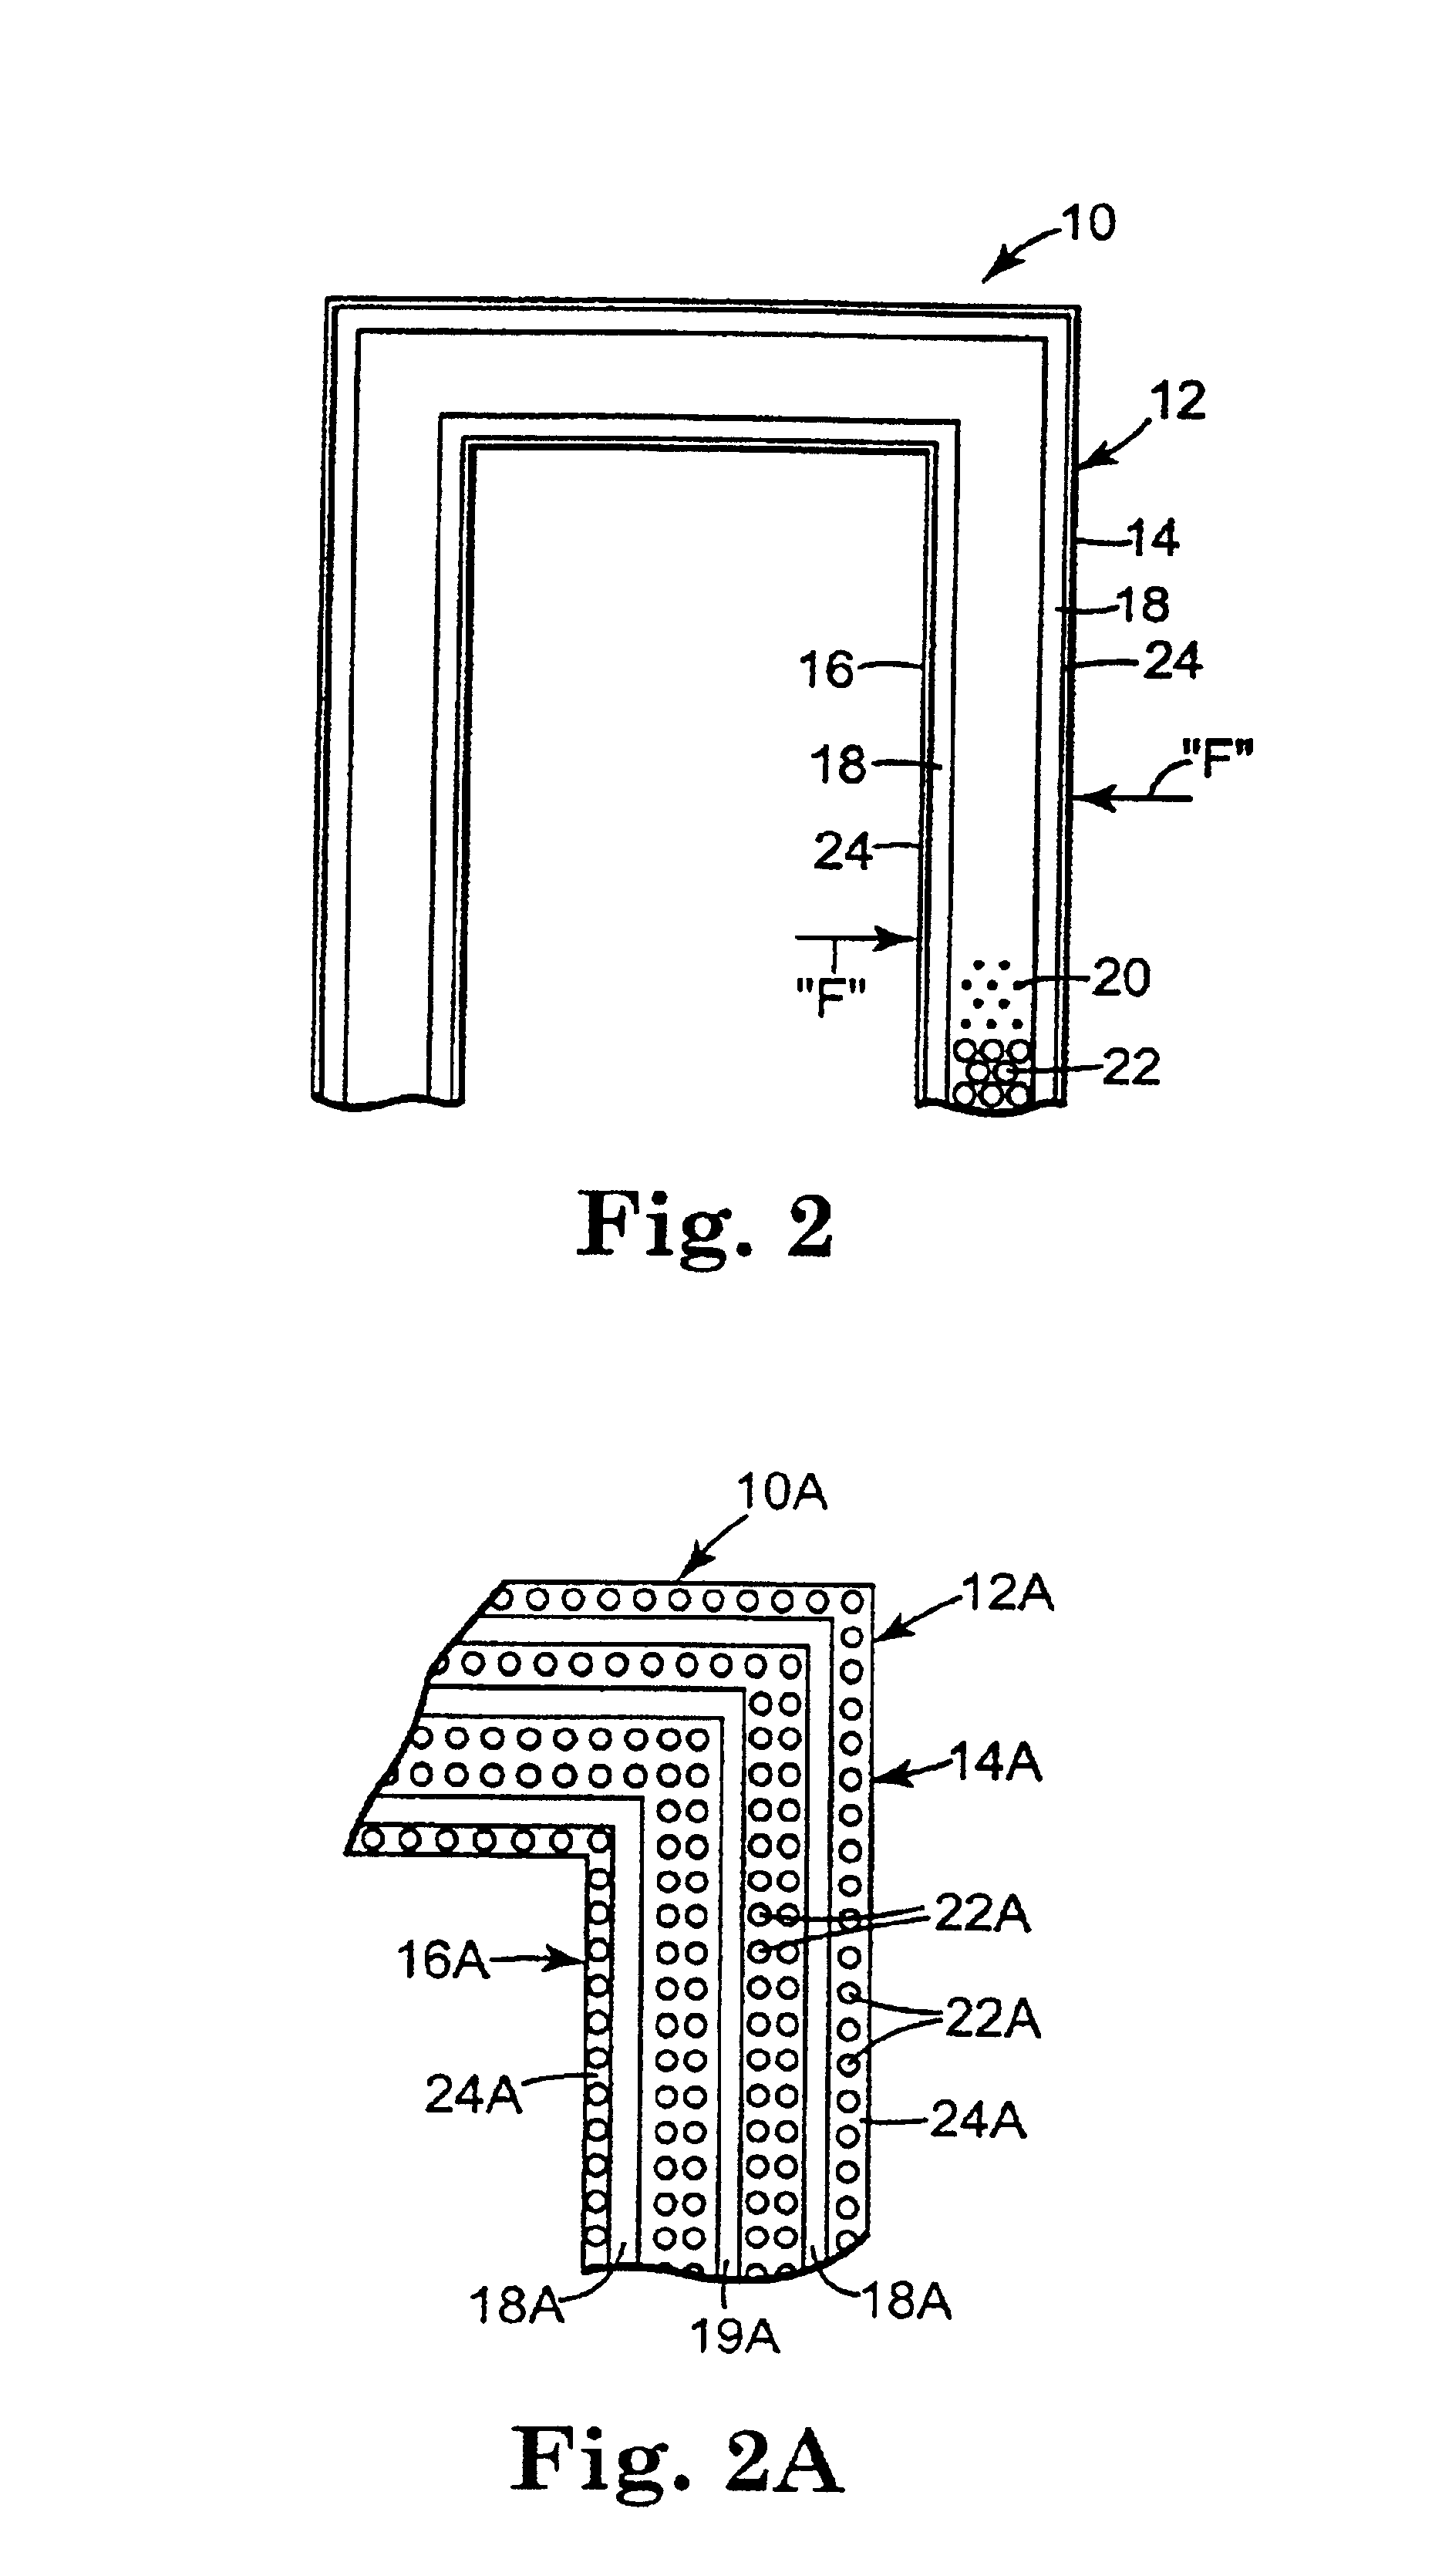 Method of making a reinforcing mat for a pultruded part